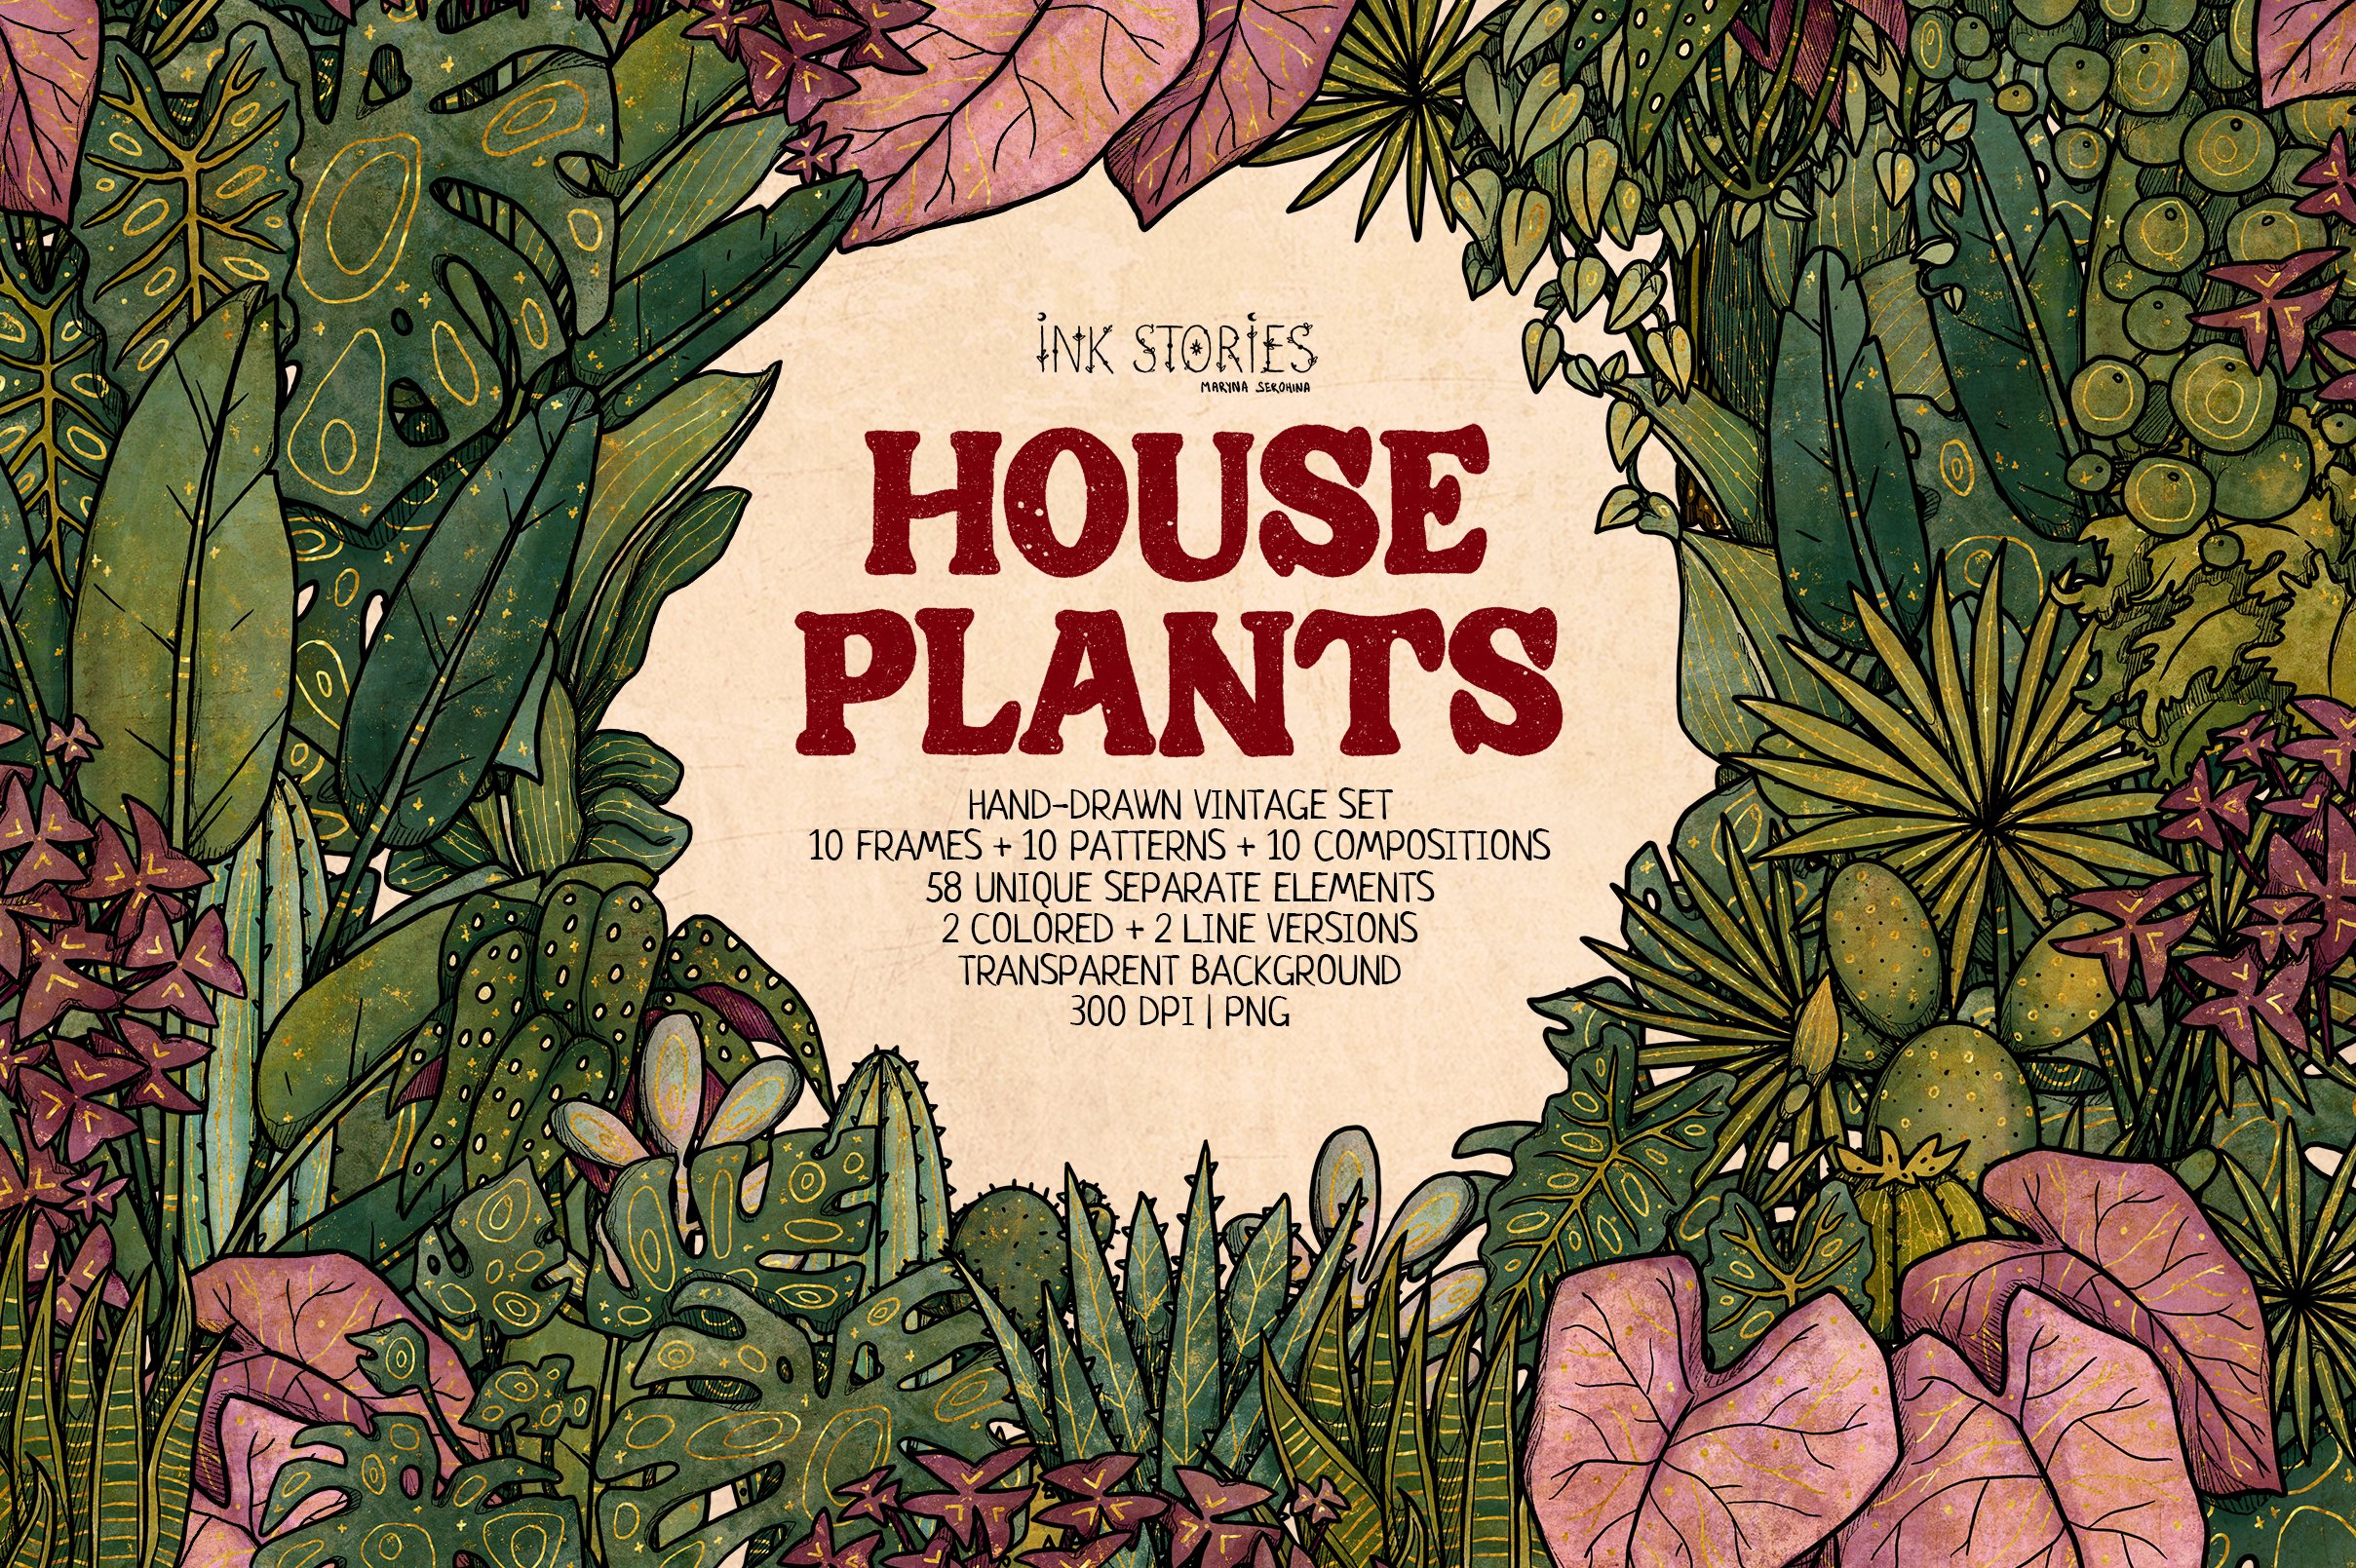 House Plants cover image.